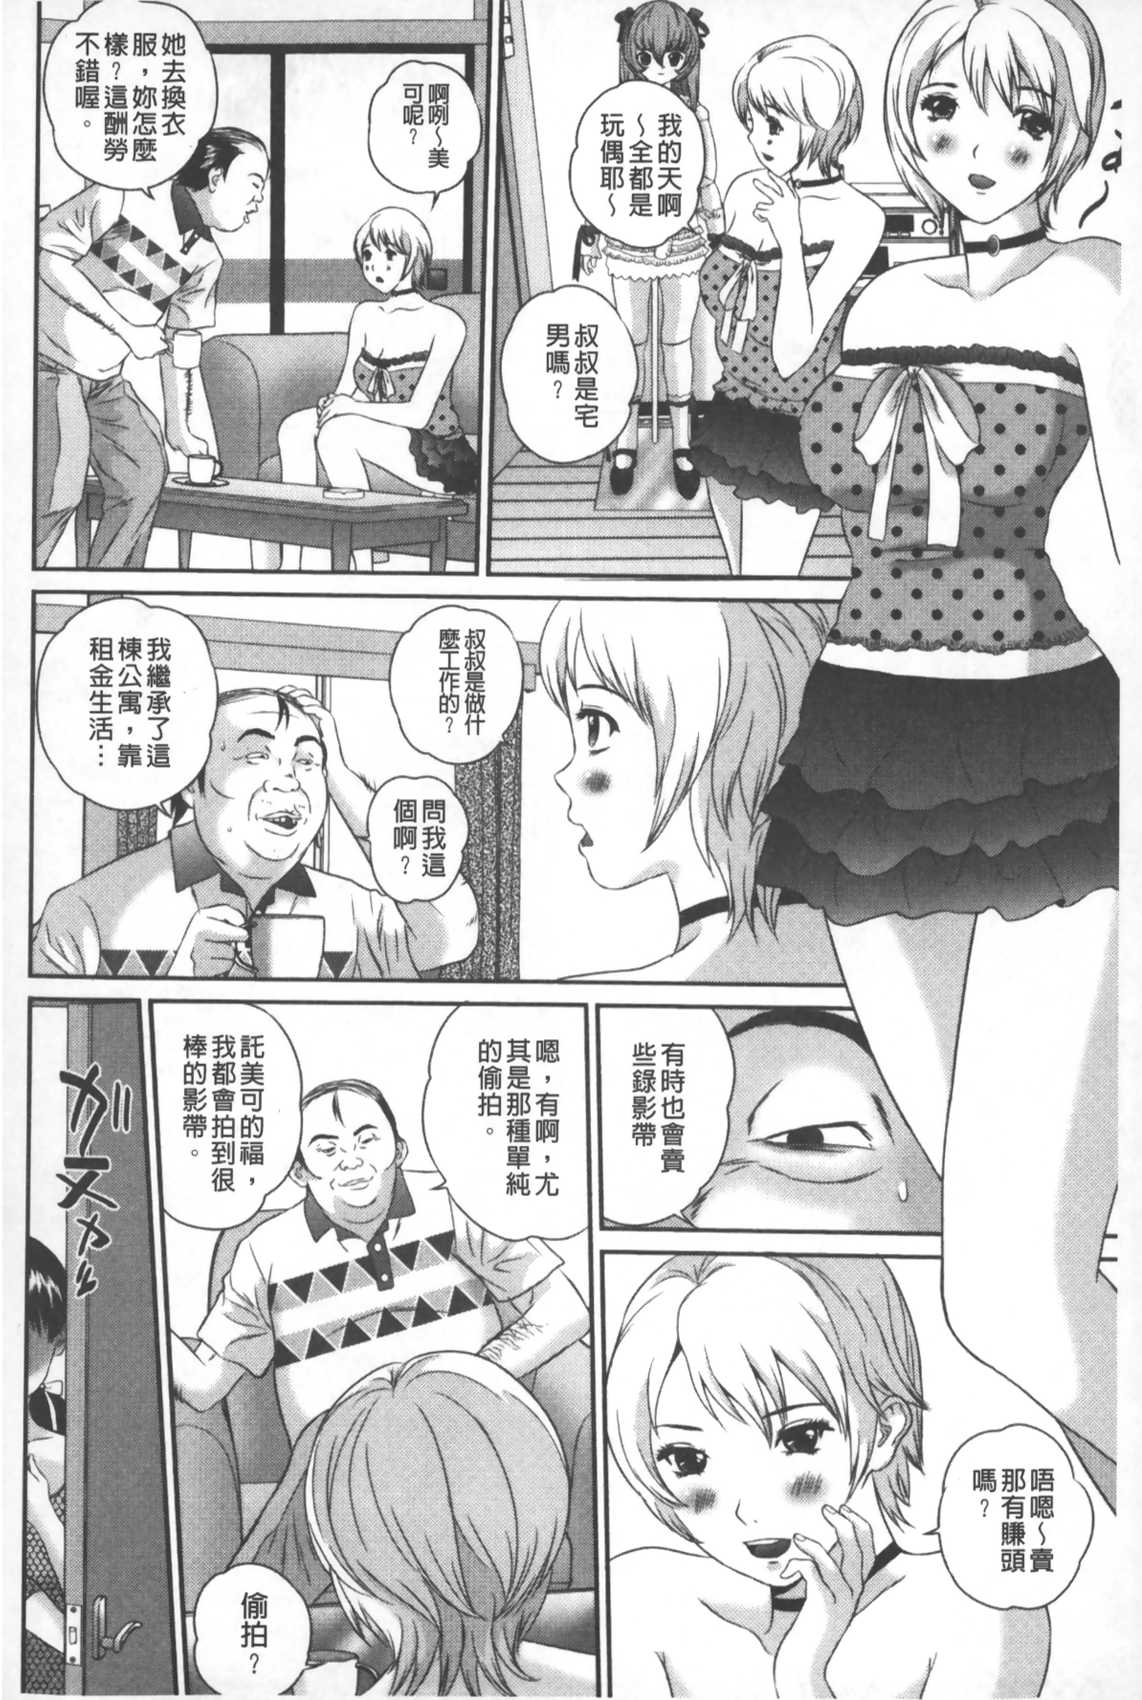 [Manzou] Tousatsu Collector | 盜拍題材精選集 [Chinese] page 29 full